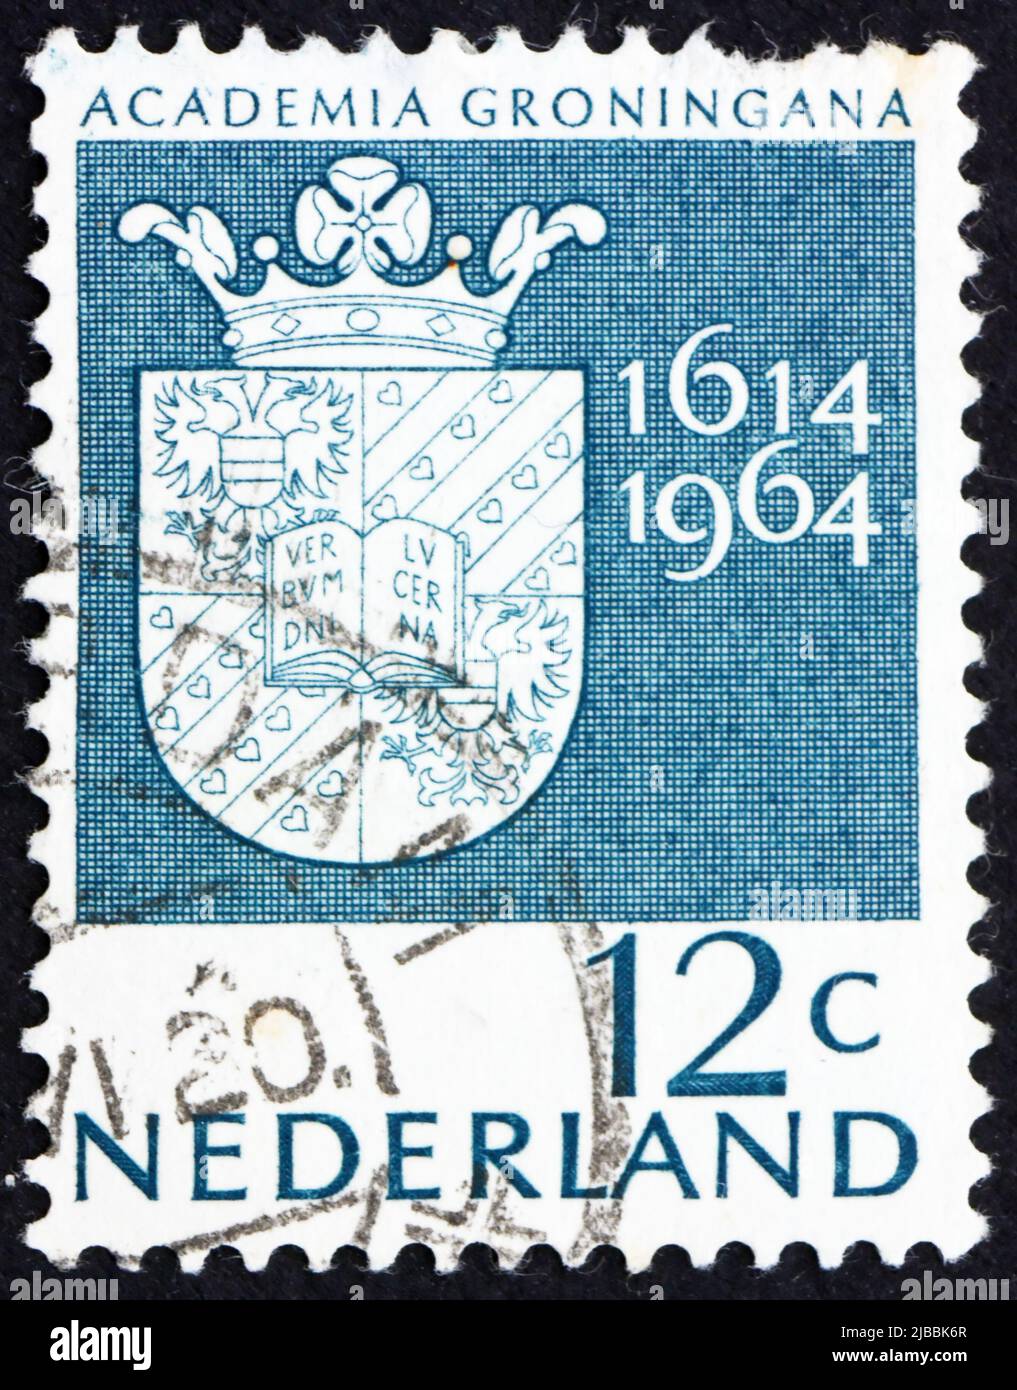 NETHERLANDS - CIRCA 1964: a stamp printed in the Netherlands shows Arms of Groningen University, 350th anniversary of the University of Groningen, cir Stock Photo